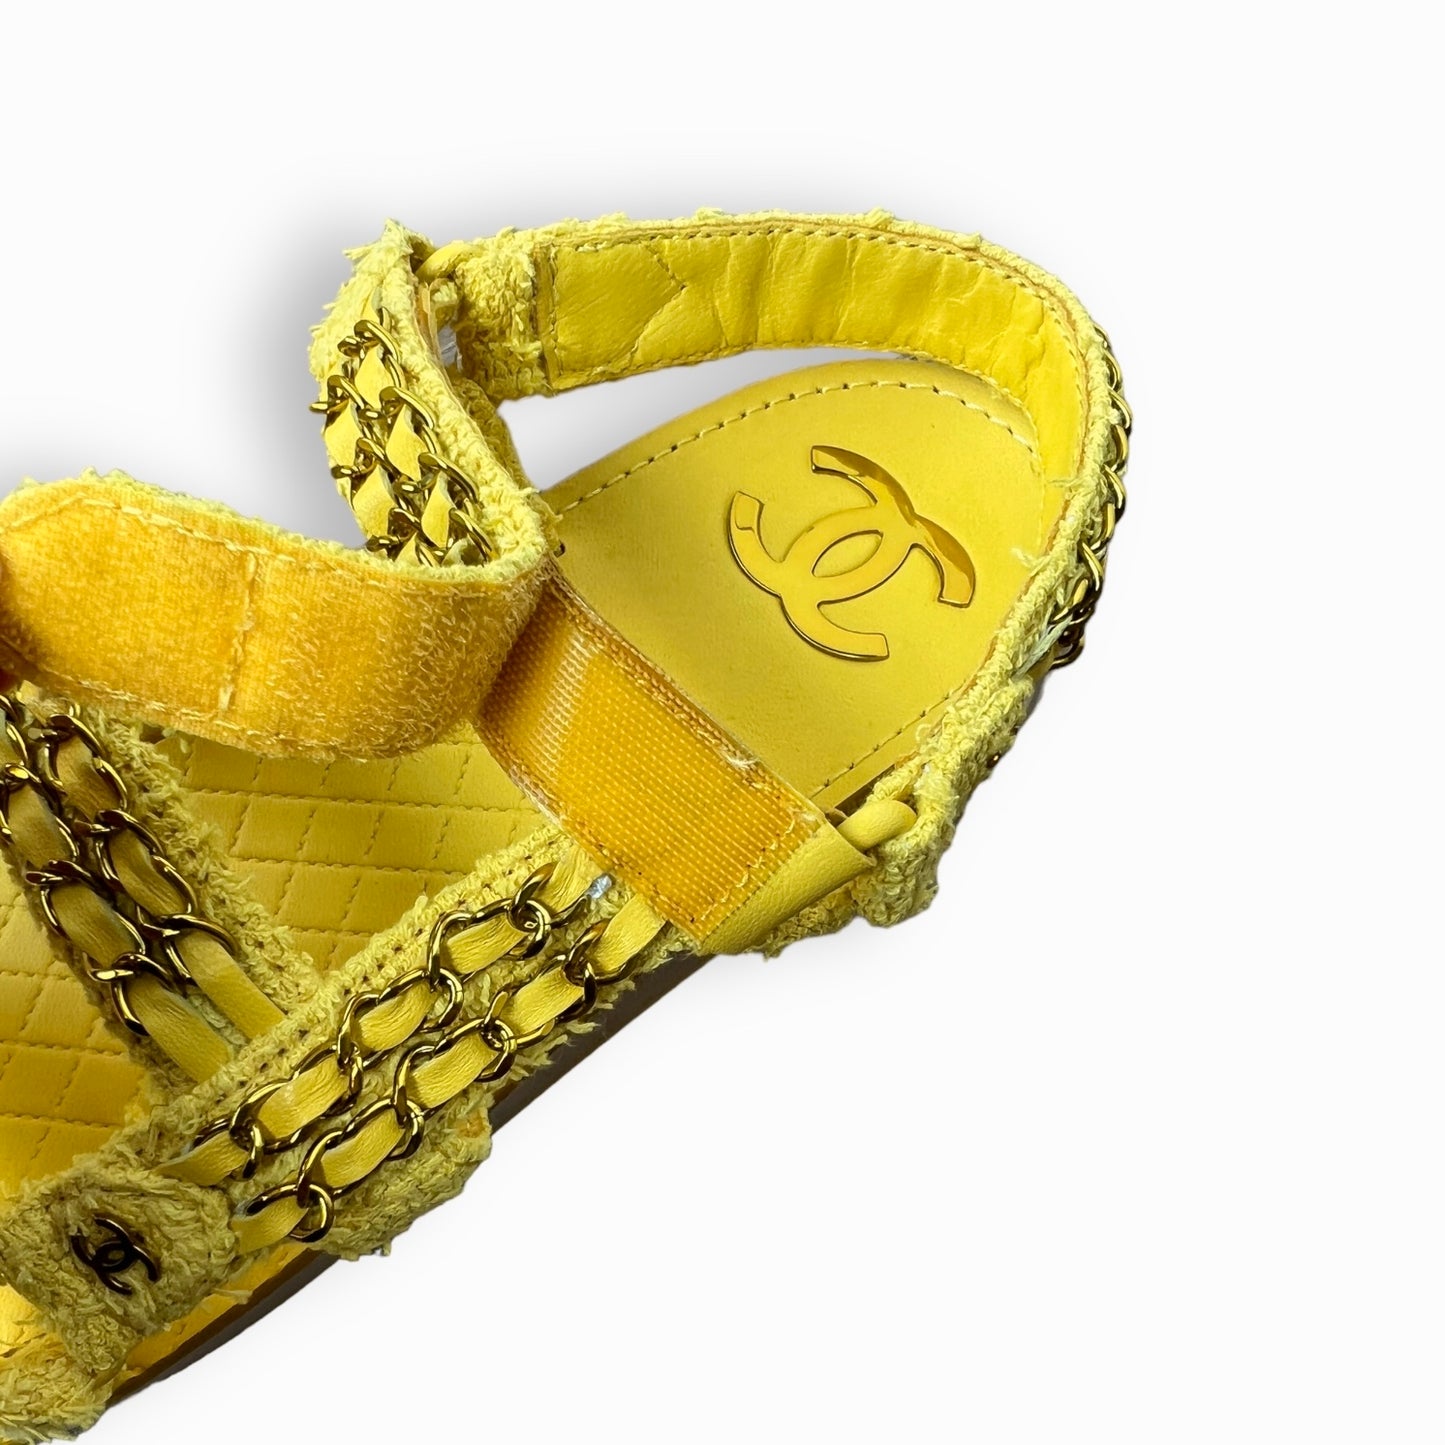 New! Chanel Tweed Yellow Chain Sandals Size 39